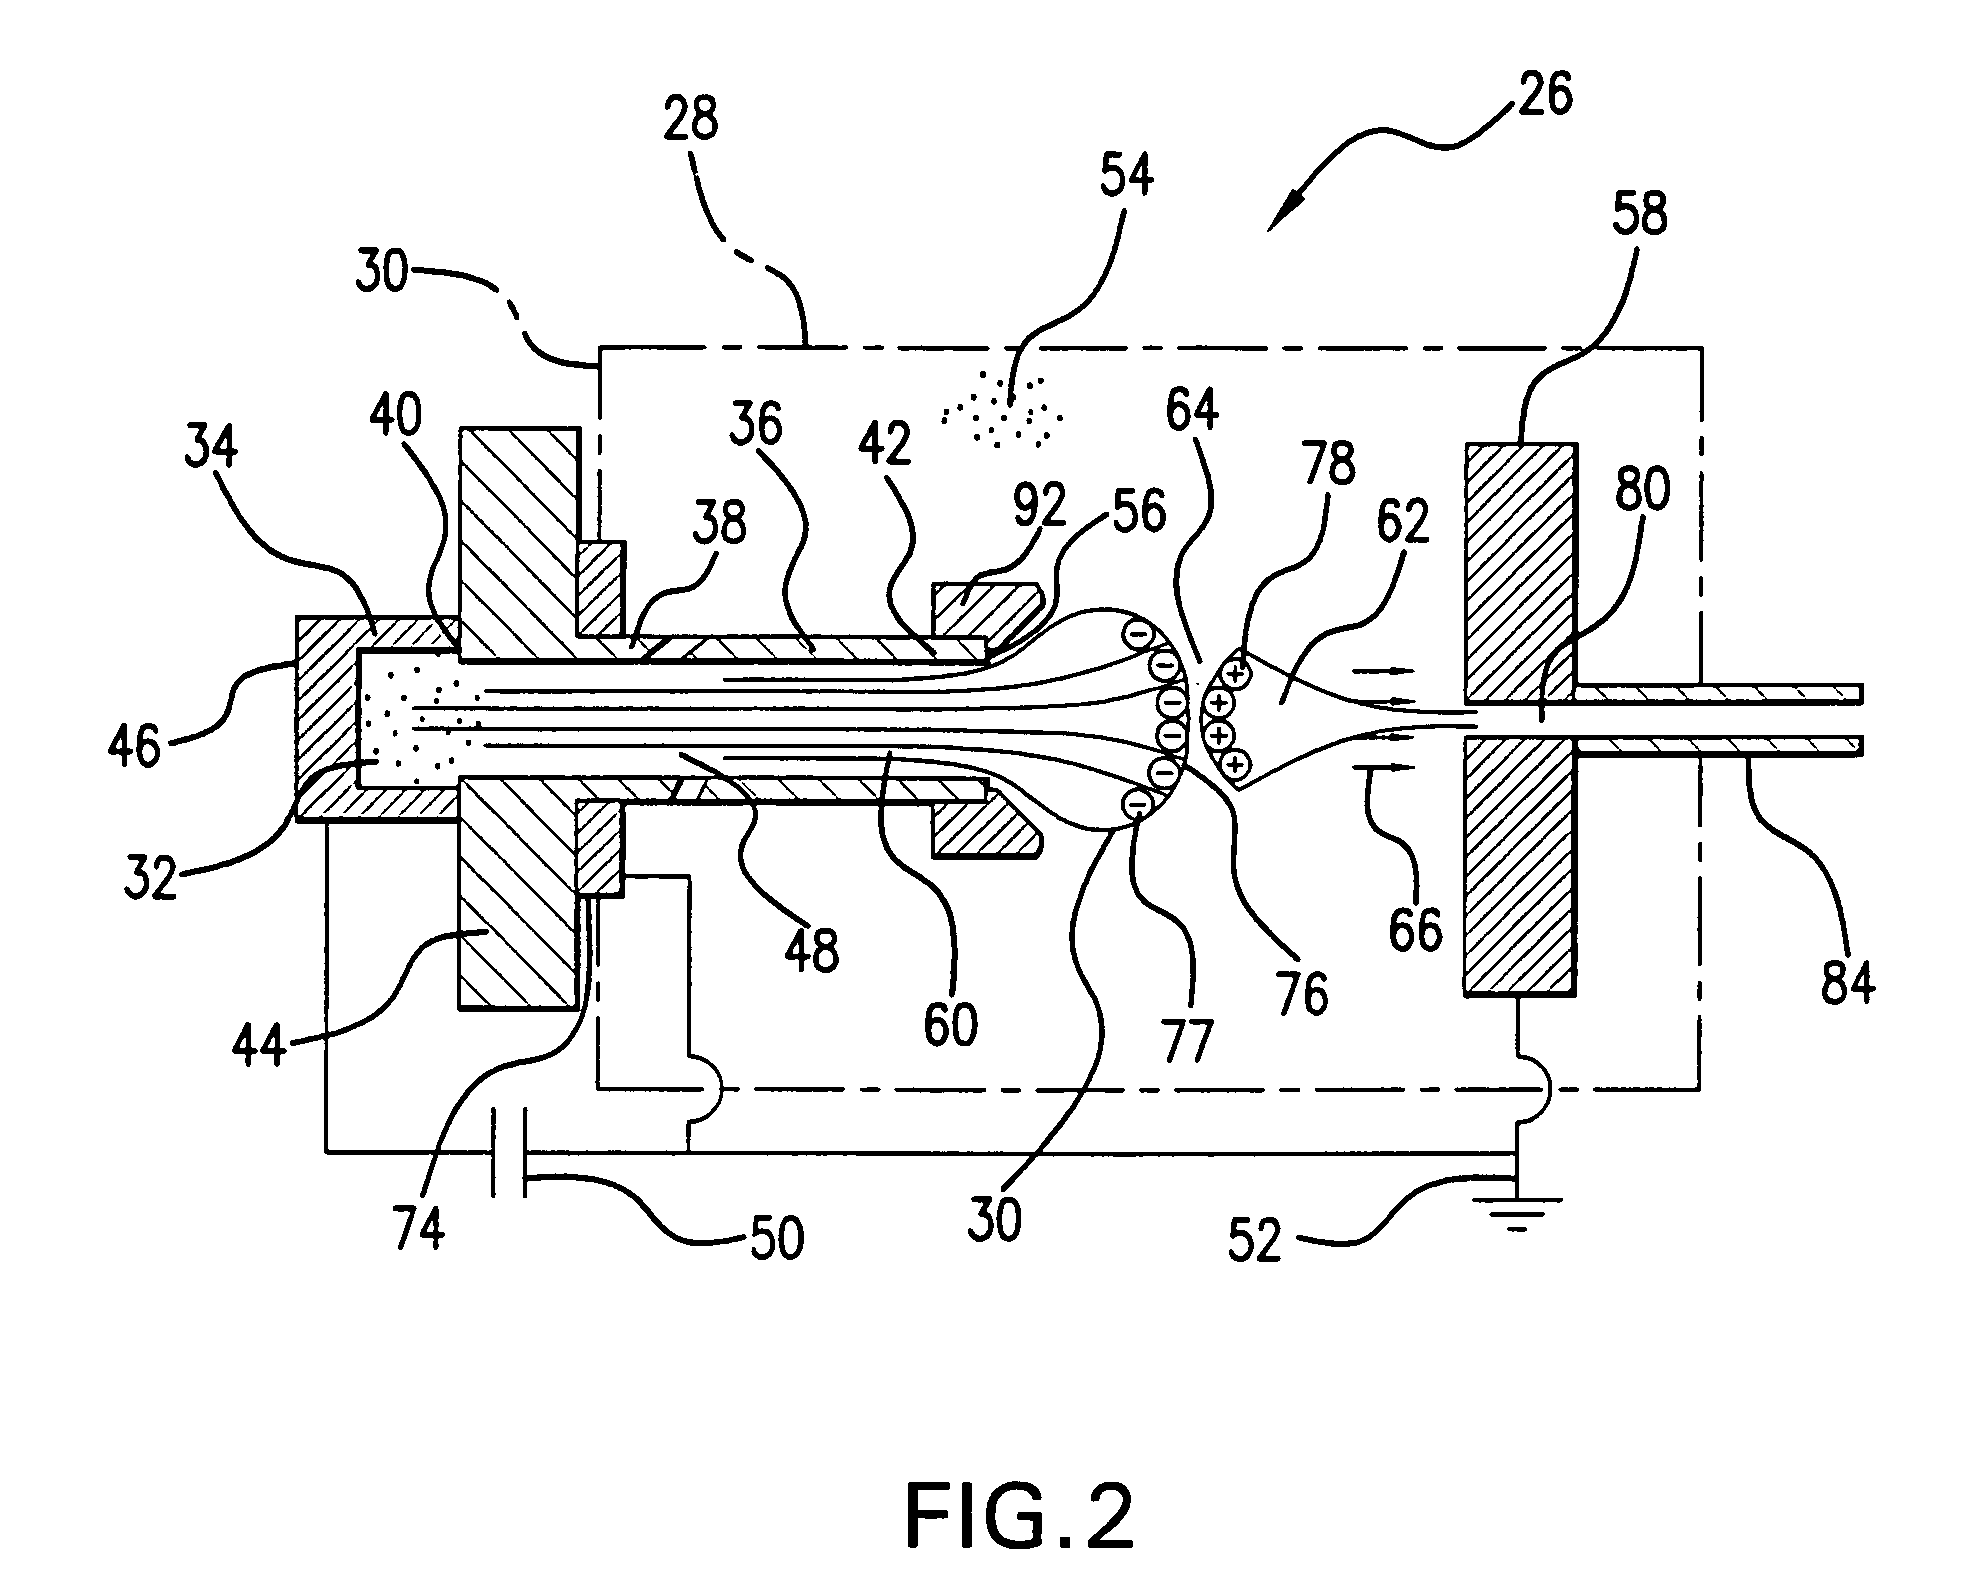 Apparatus and method utilizing high power density electron beam for generating pulsed stream of ablation plasma